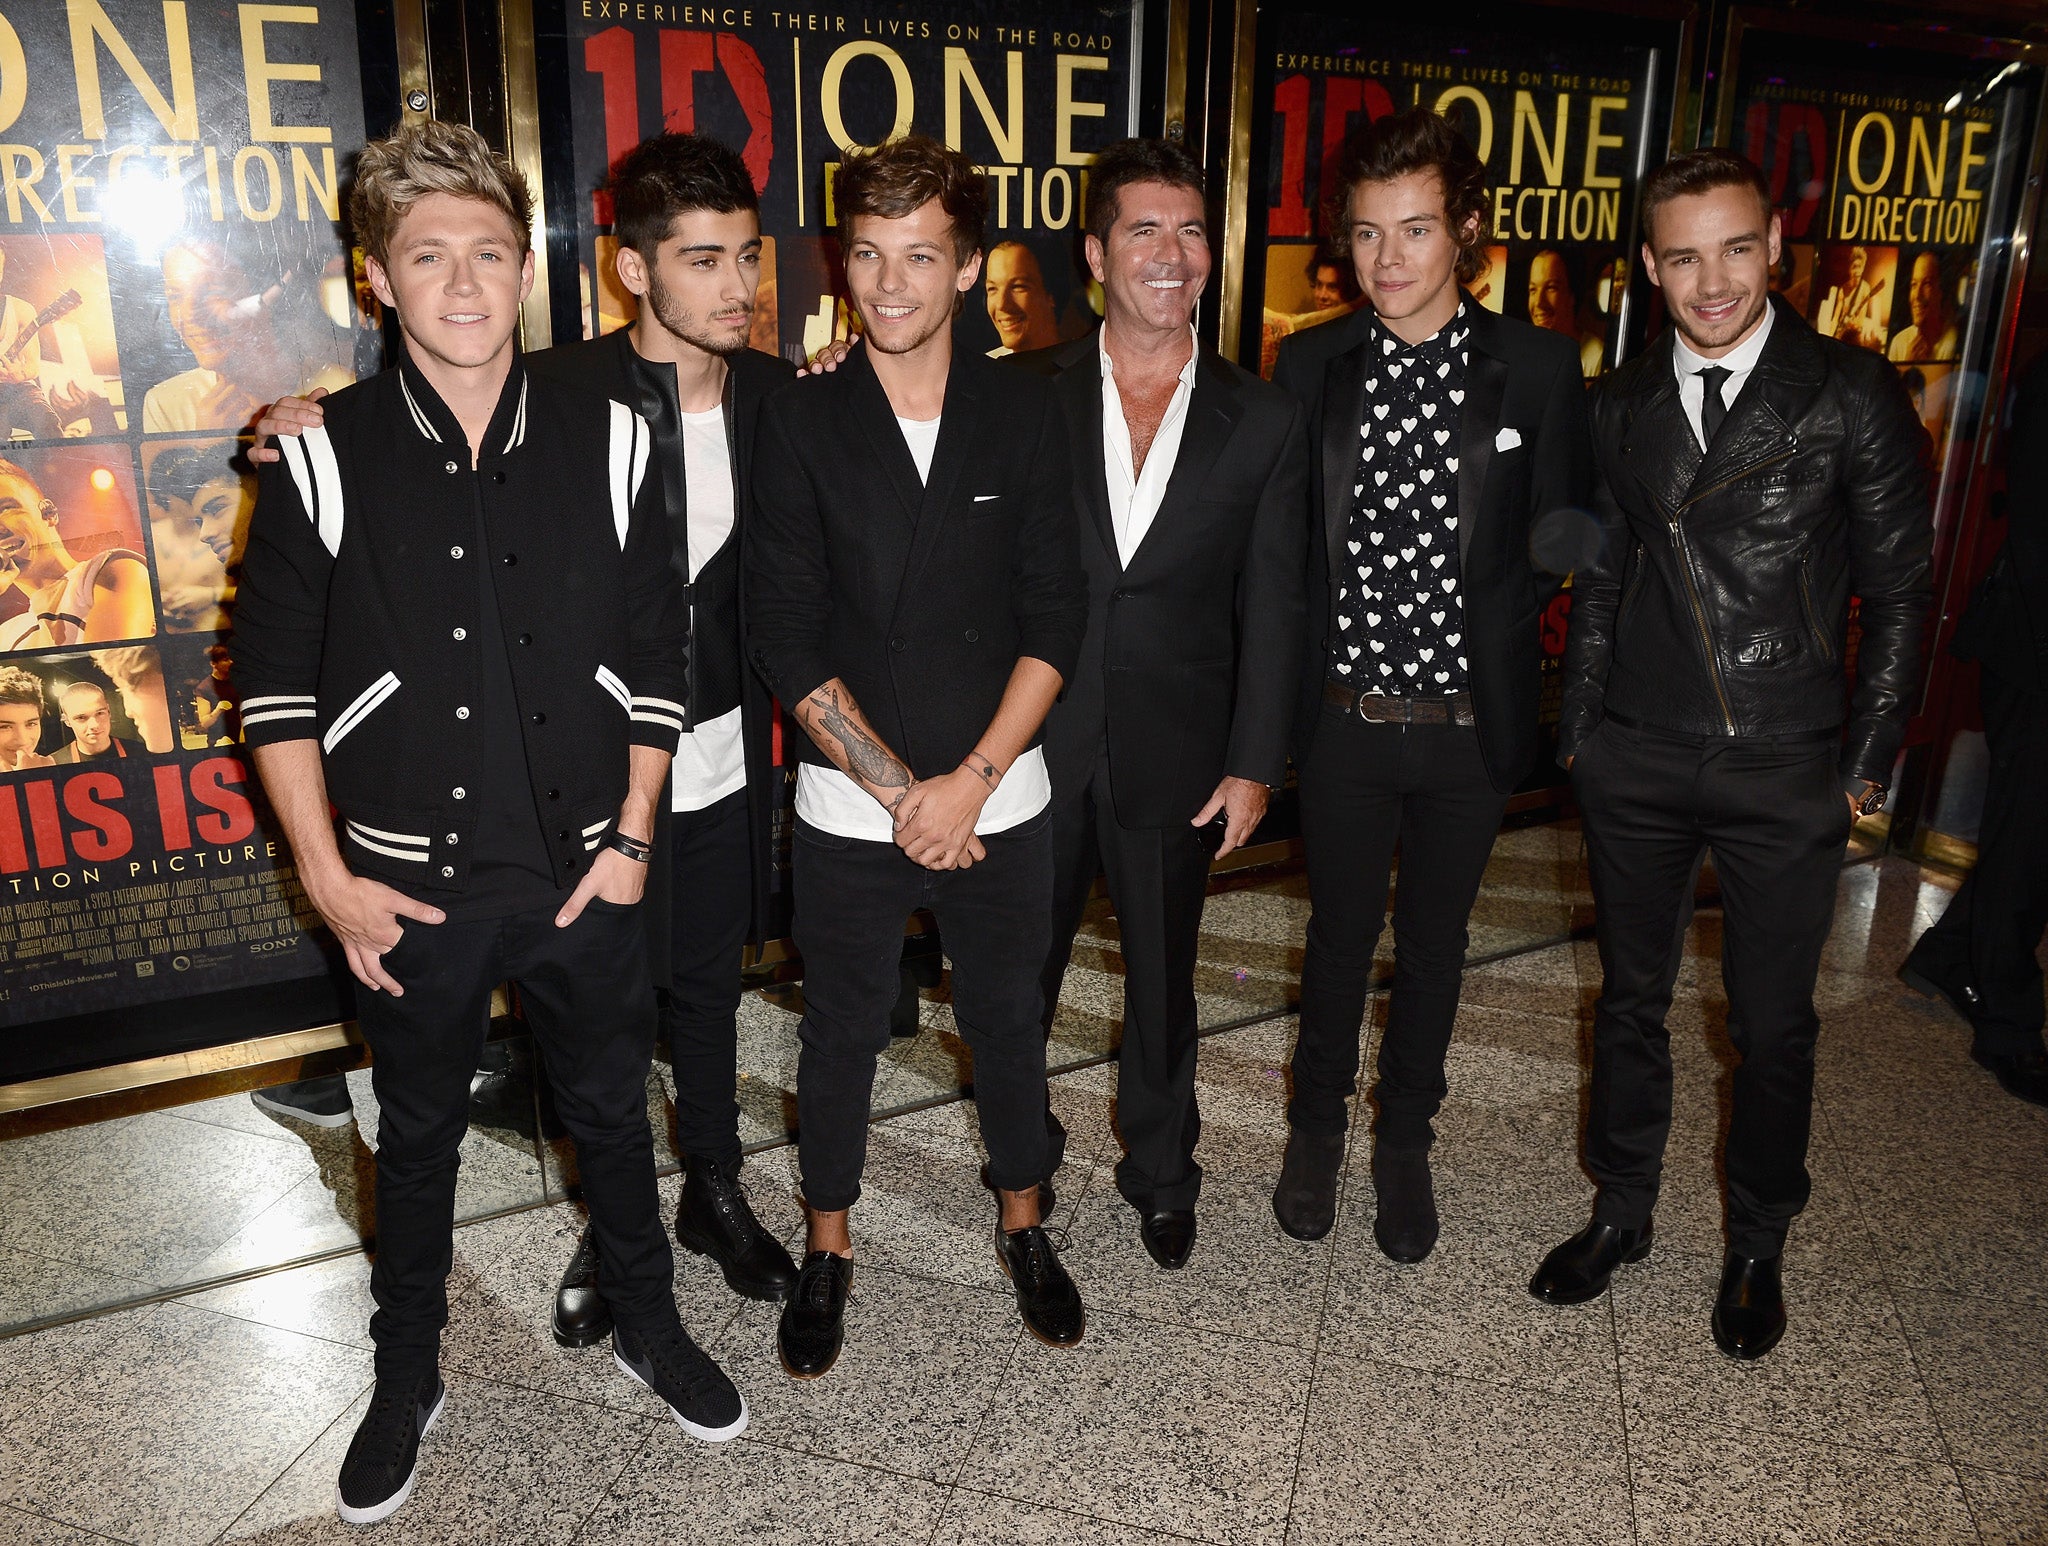 Simon Cowell (C) with (L-R) Niall Horan, Zayn Malik, Louis Tomlinson, Harry Styles and Liam Payne from One Direction attend the 'One Direction This Is Us' world premiere